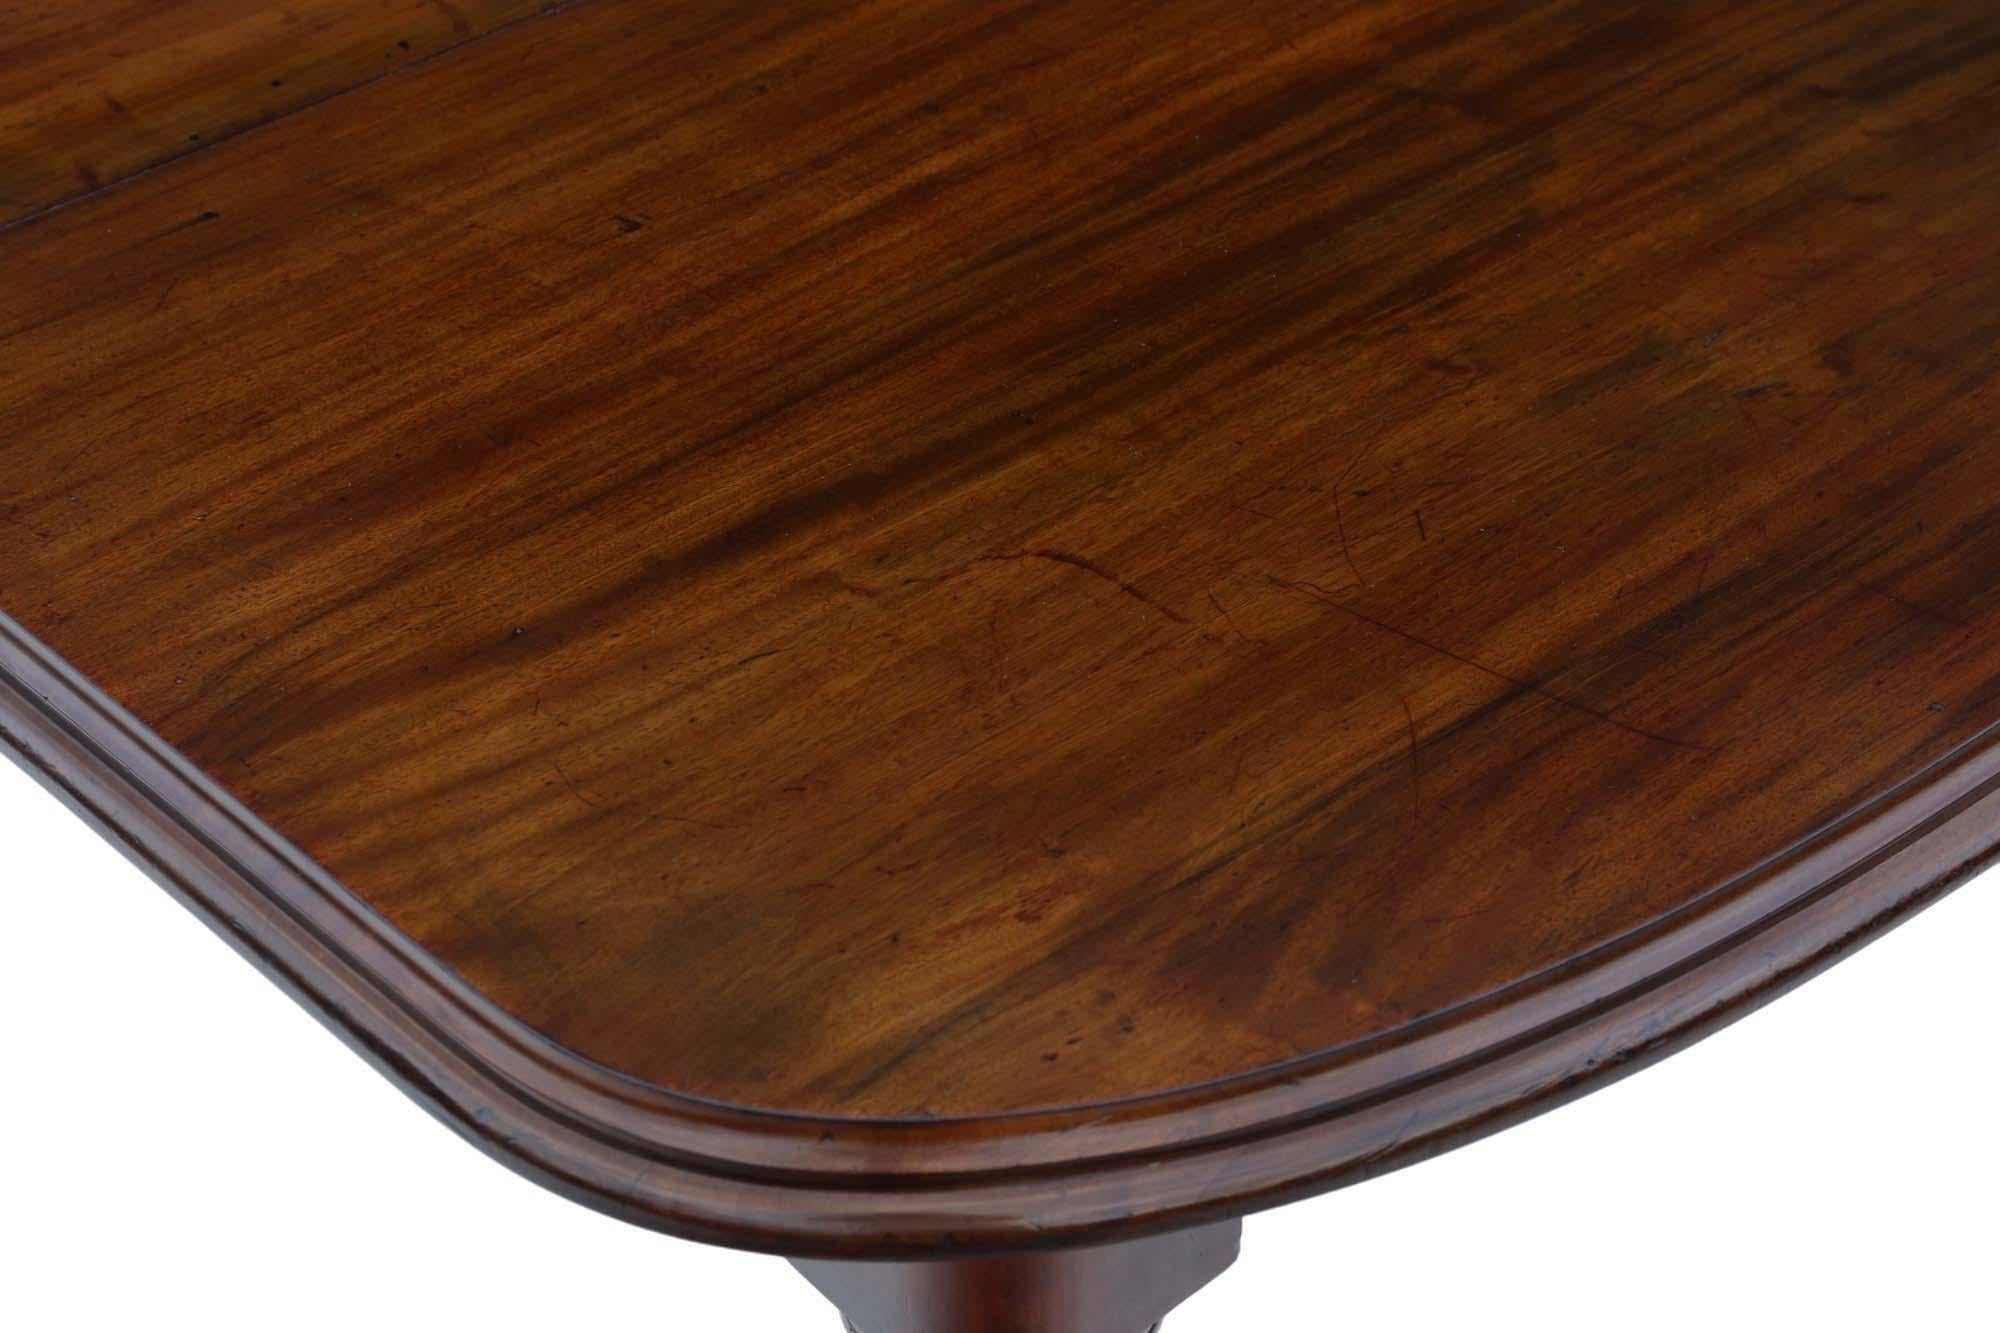 Wood Antique Mid-19th Century Mahogany Extending Dining Table - Large, Fine Quality For Sale